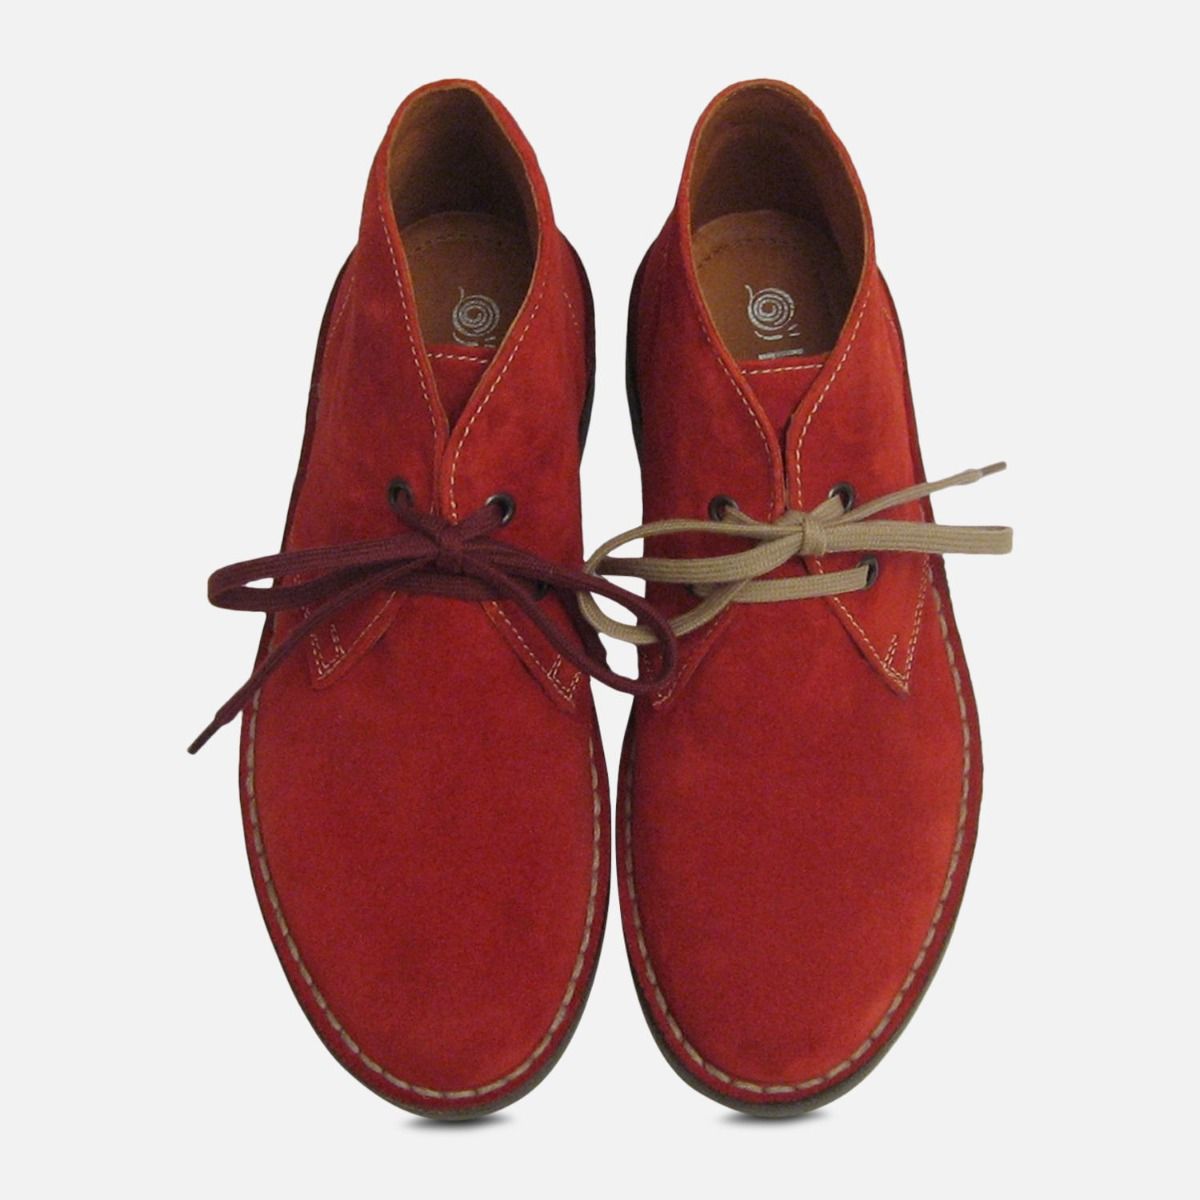 red suede boots for women